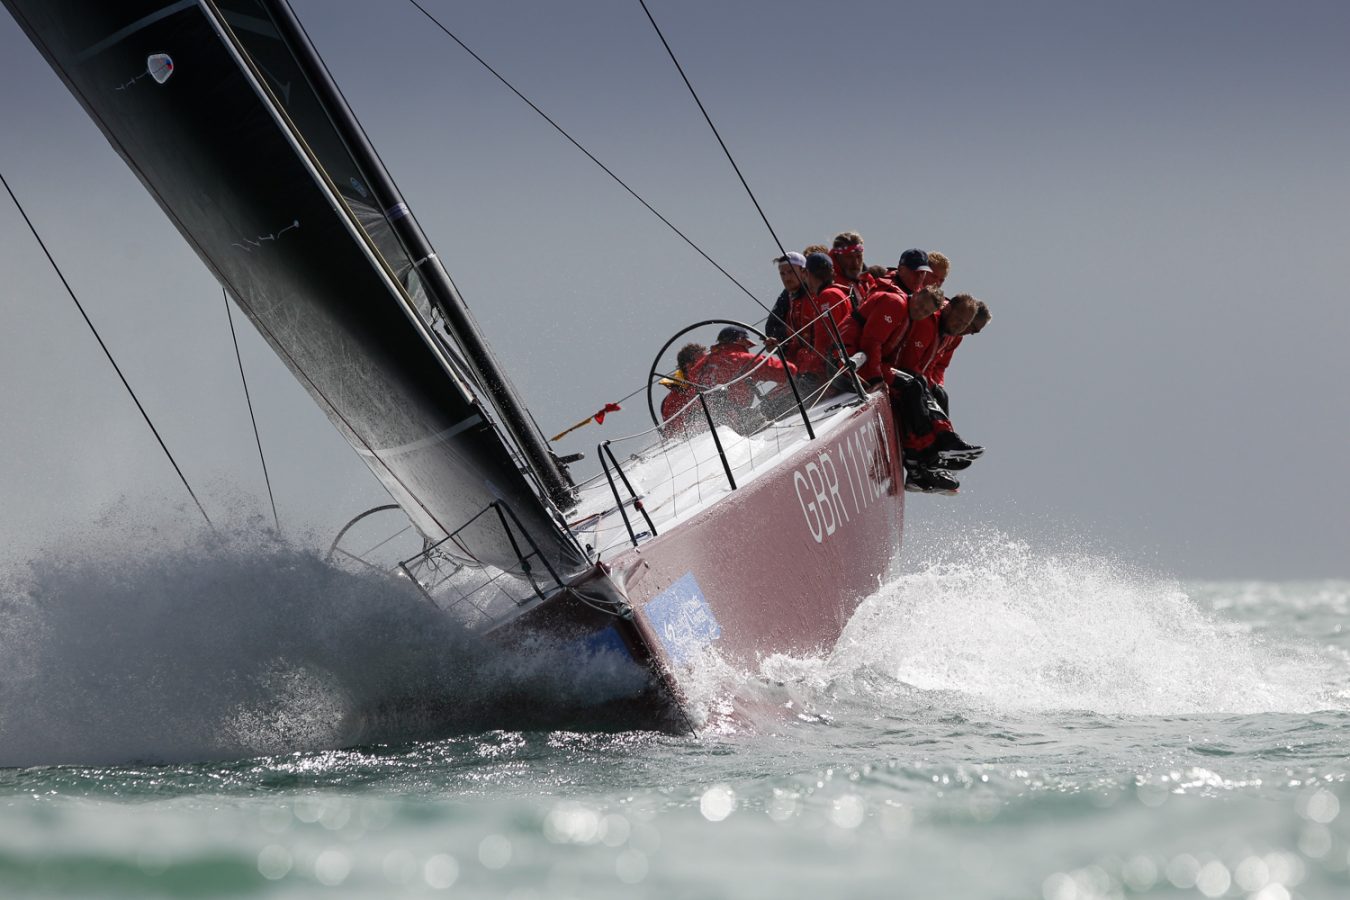 NORTH SAILS CLIENTS POWER 16 DIVISION WINS AT COWES WEEK